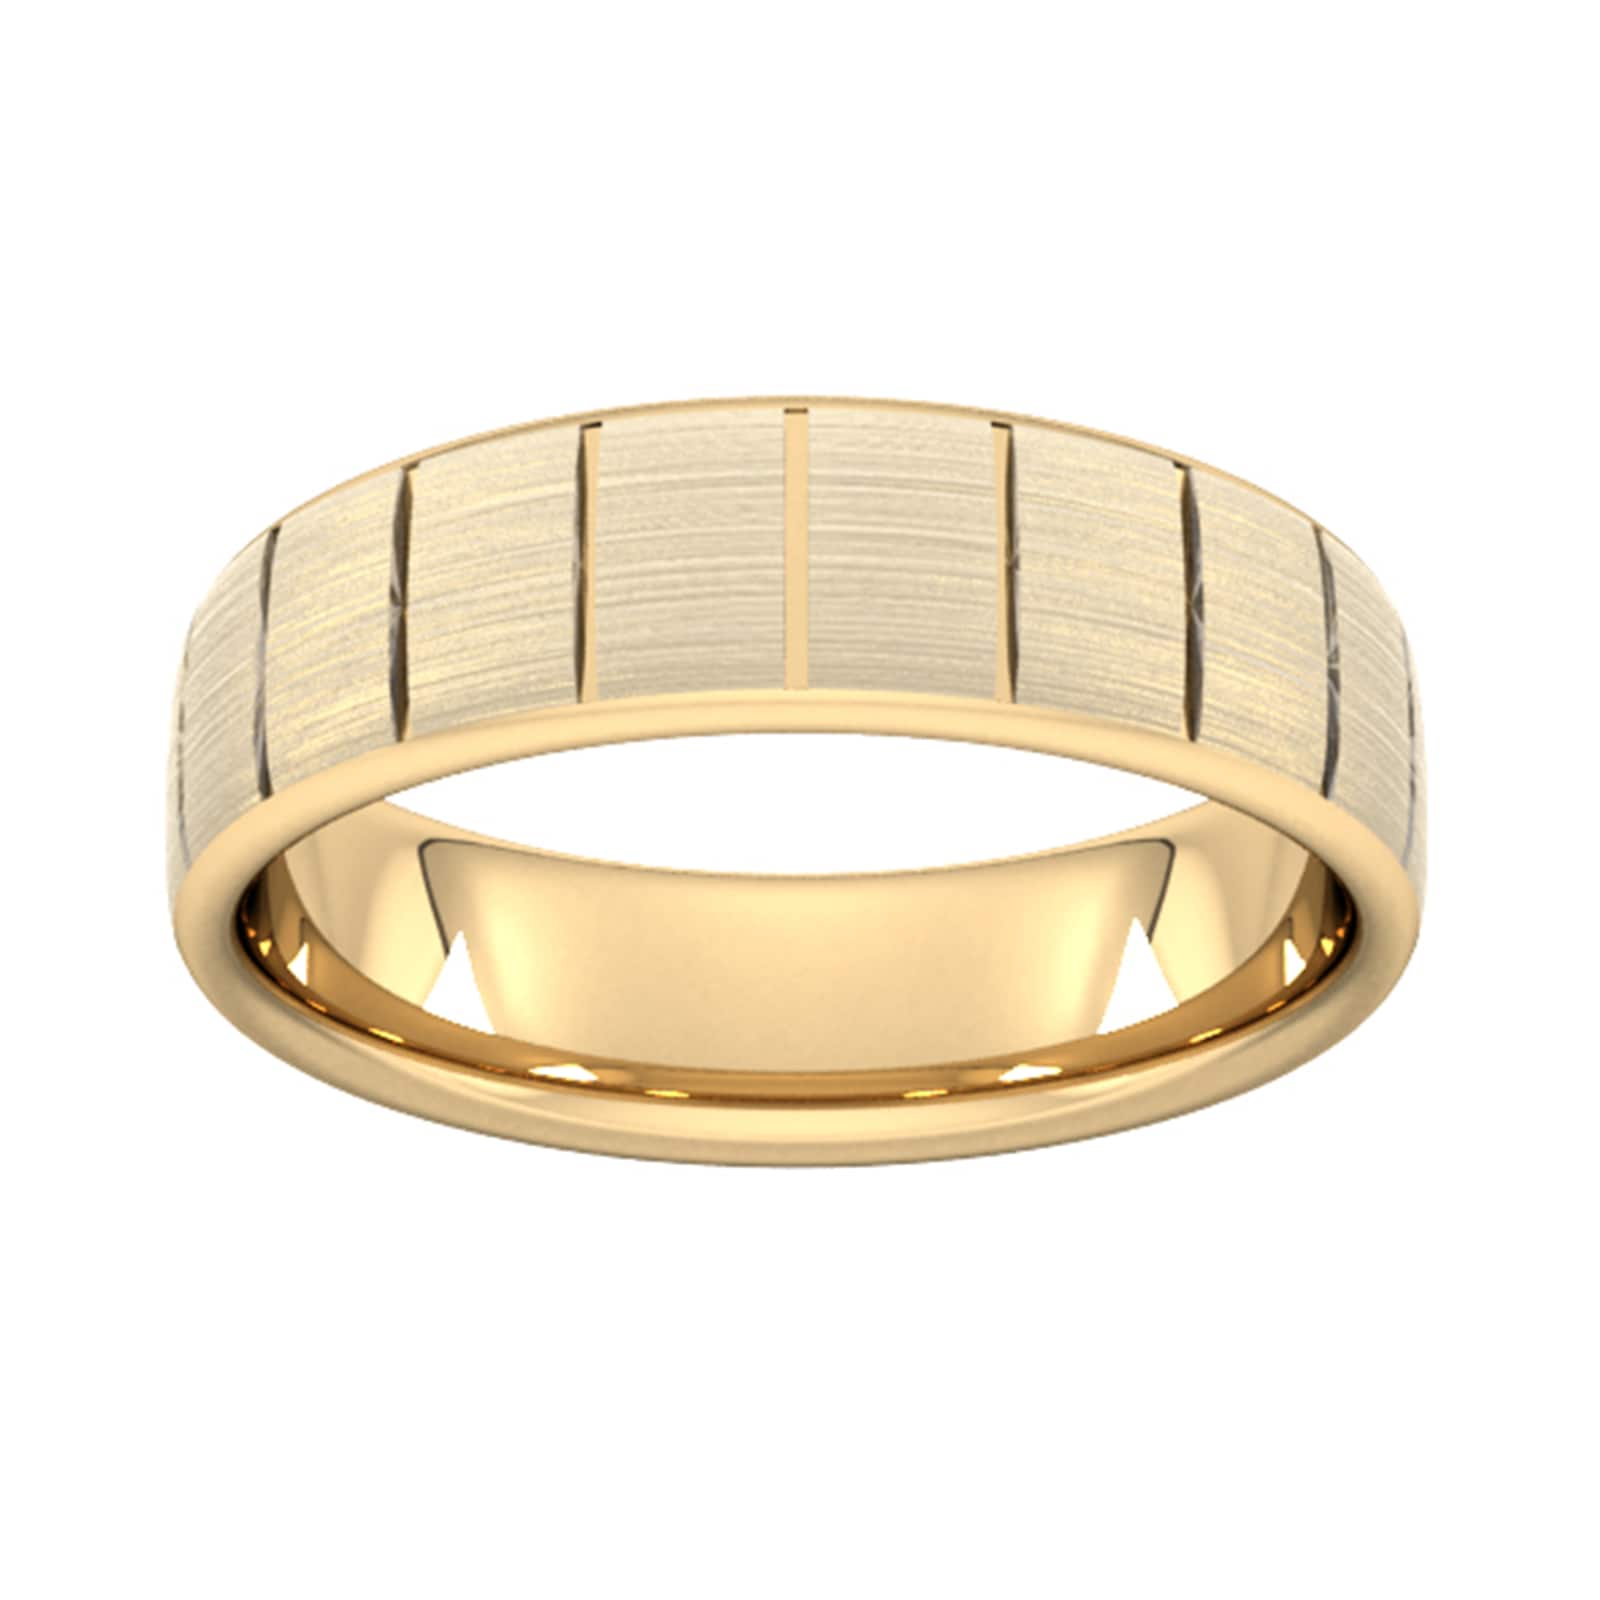 6mm Traditional Court Standard Vertical Lines Wedding Ring In 18 Carat Yellow Gold - Ring Size M